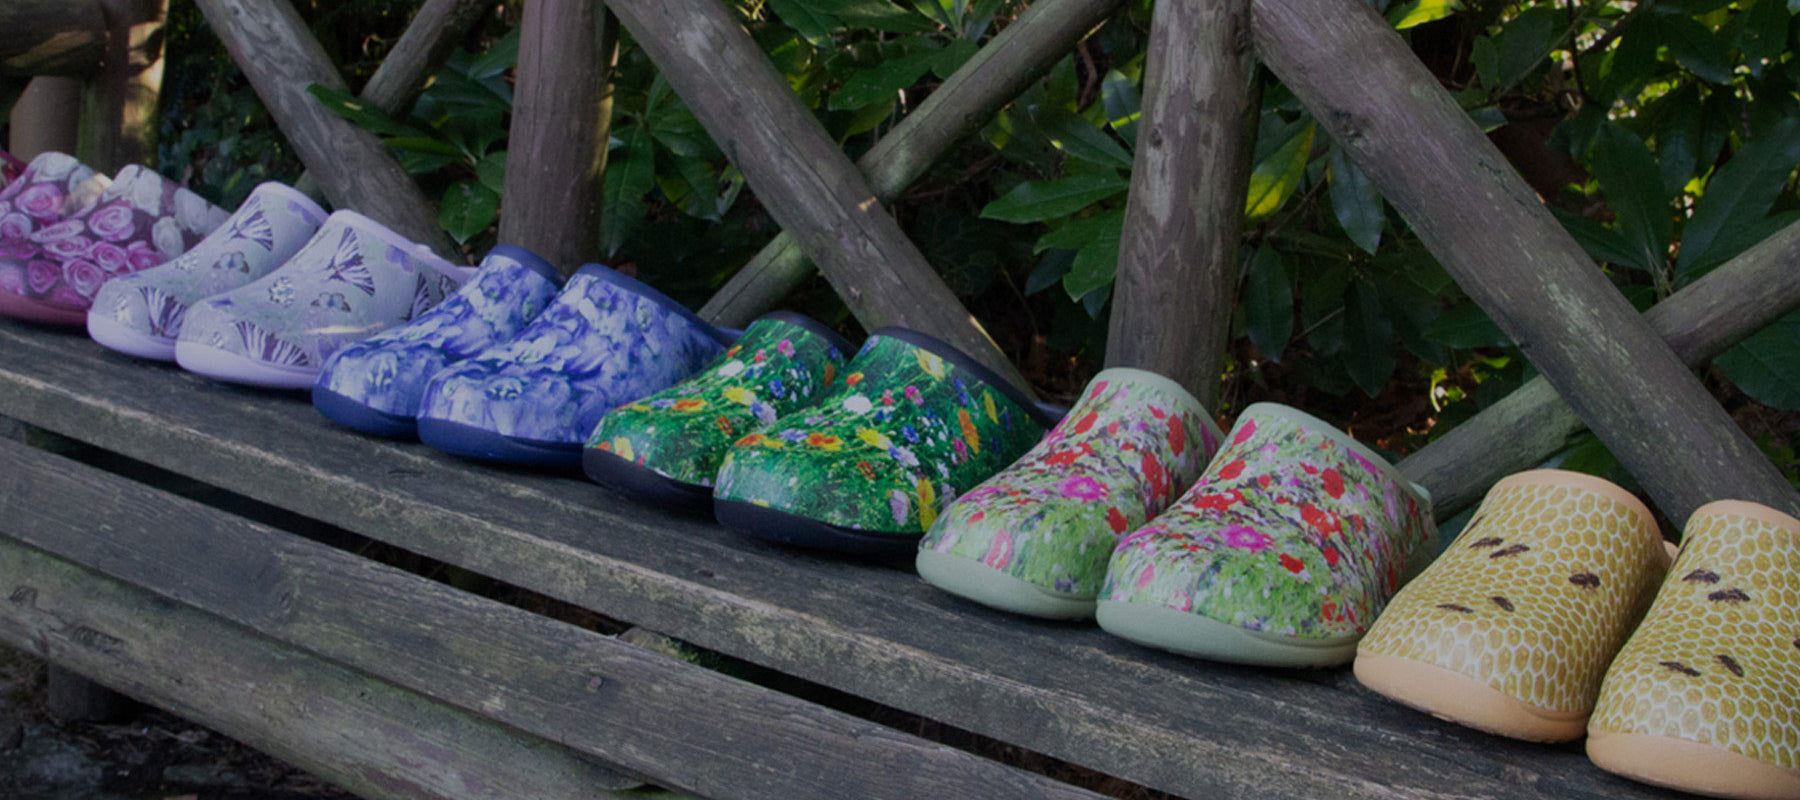 Ladies Backdoorshoes garden clogs colourful shoes